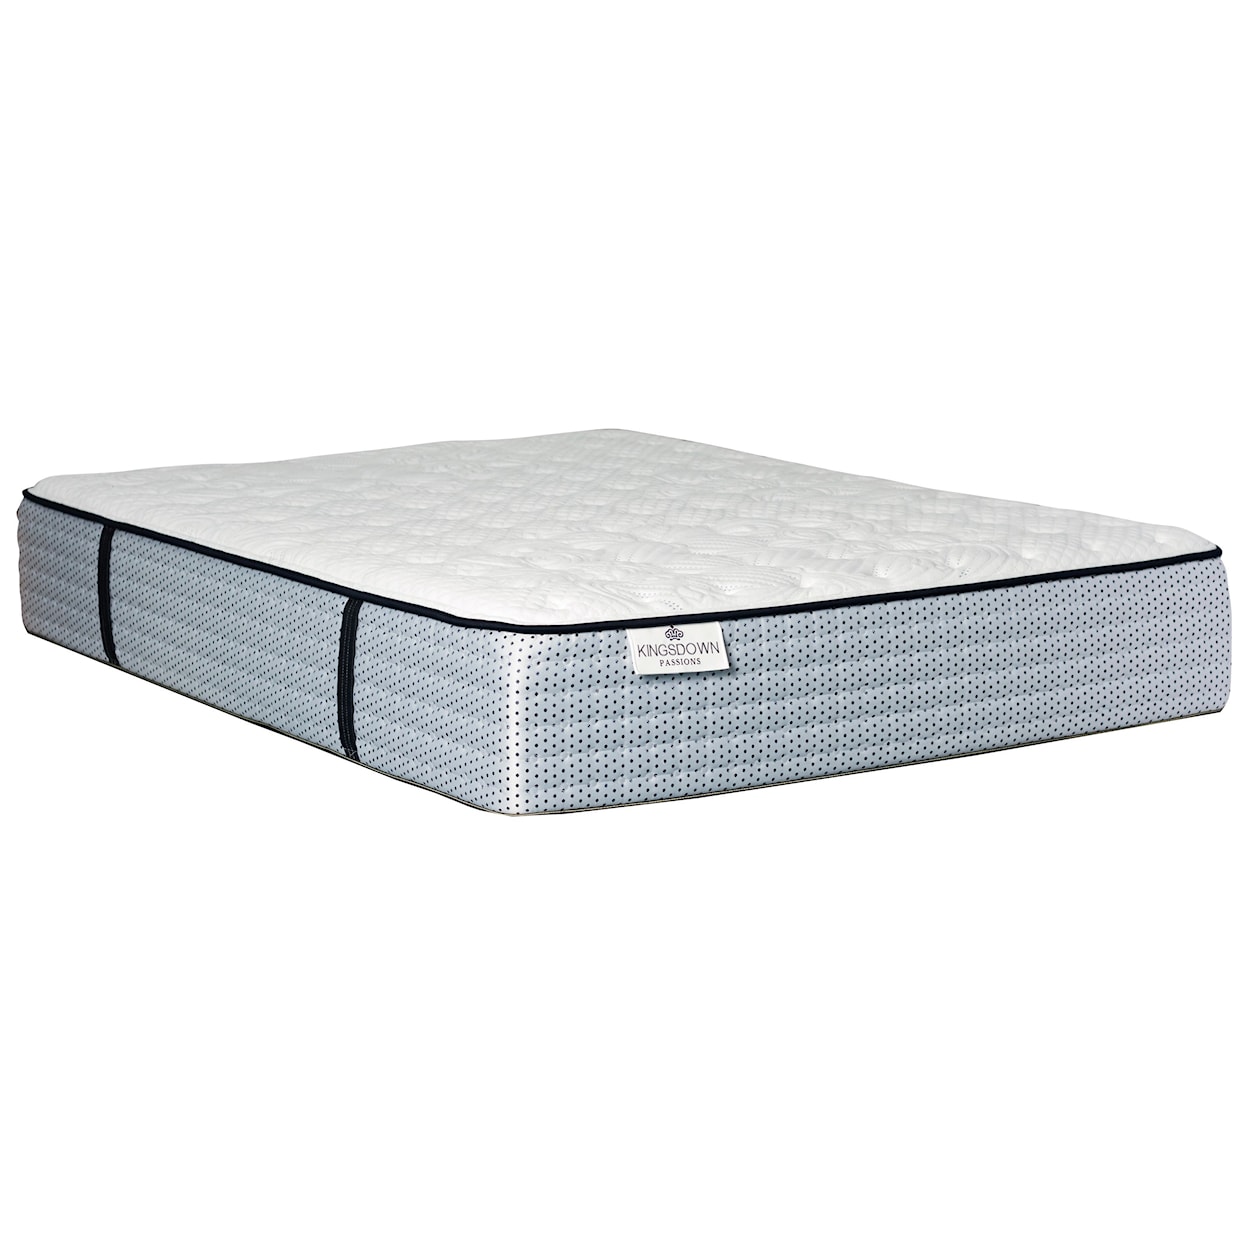 Kingsdown Passions Le Claire TT King Pocketed Coil Mattress